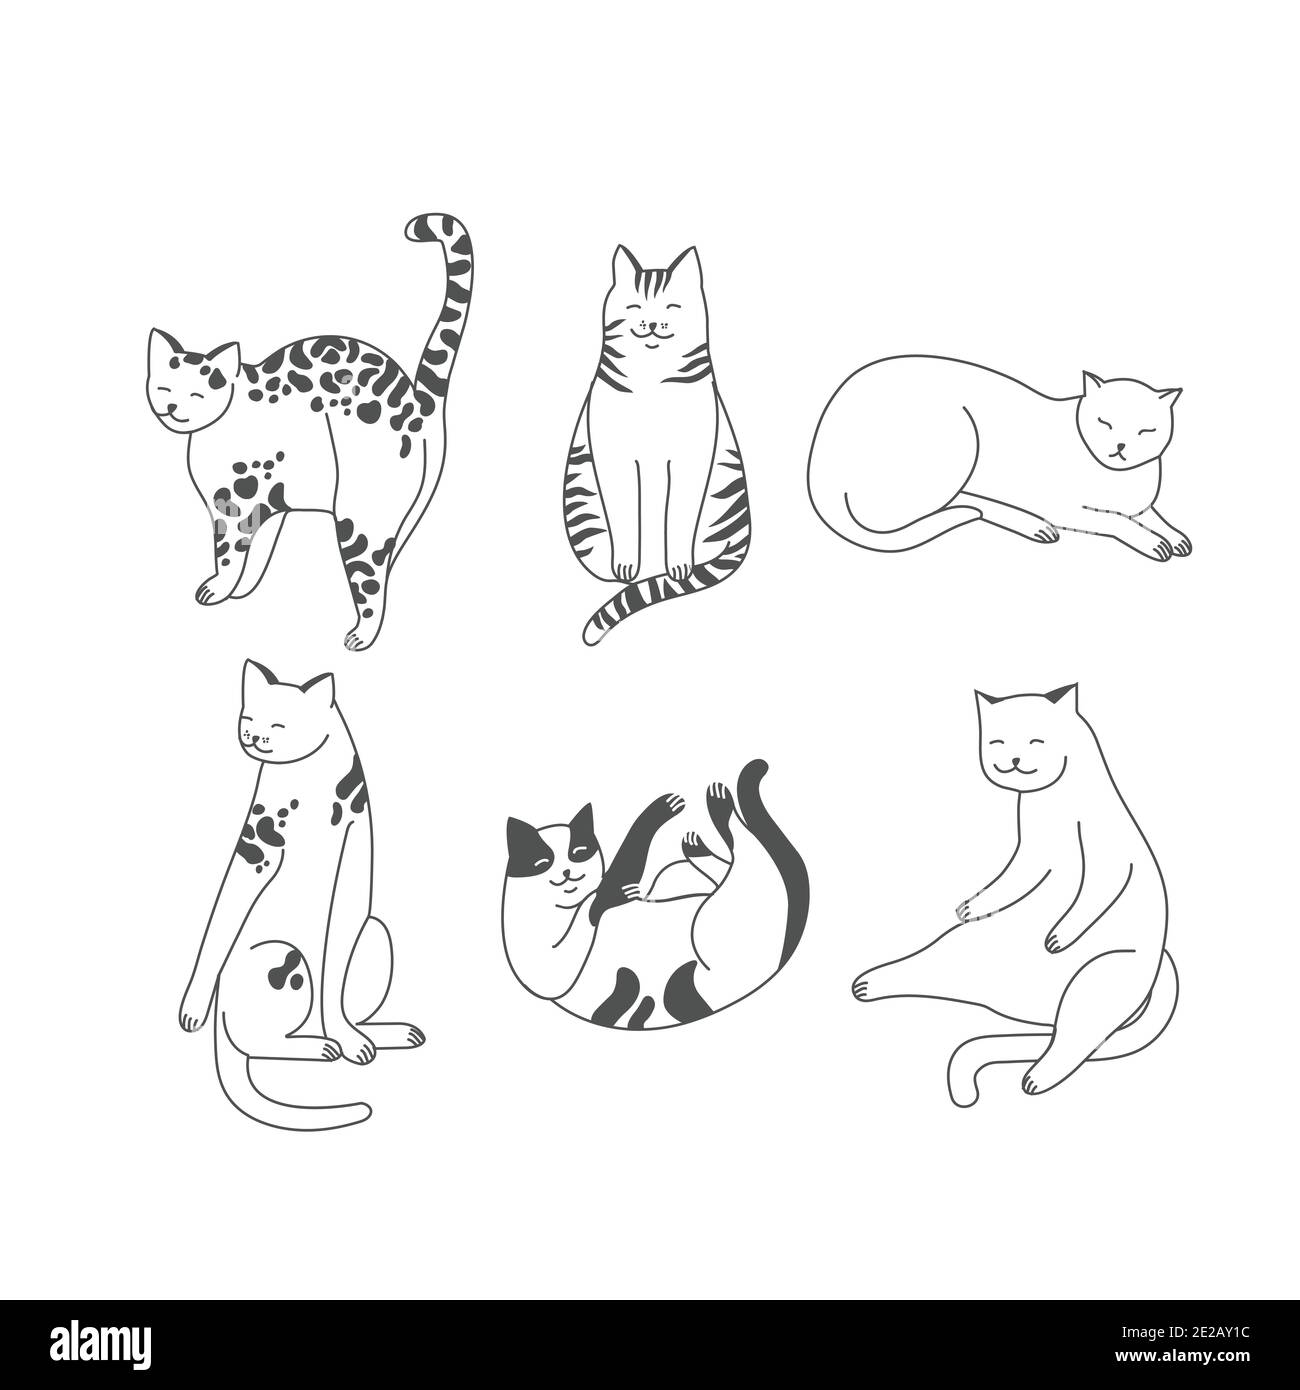 Vector linear illustration set of adorable catsn in different poses sleeping, stretching itself, playing. Cats breeds. Stock Vector